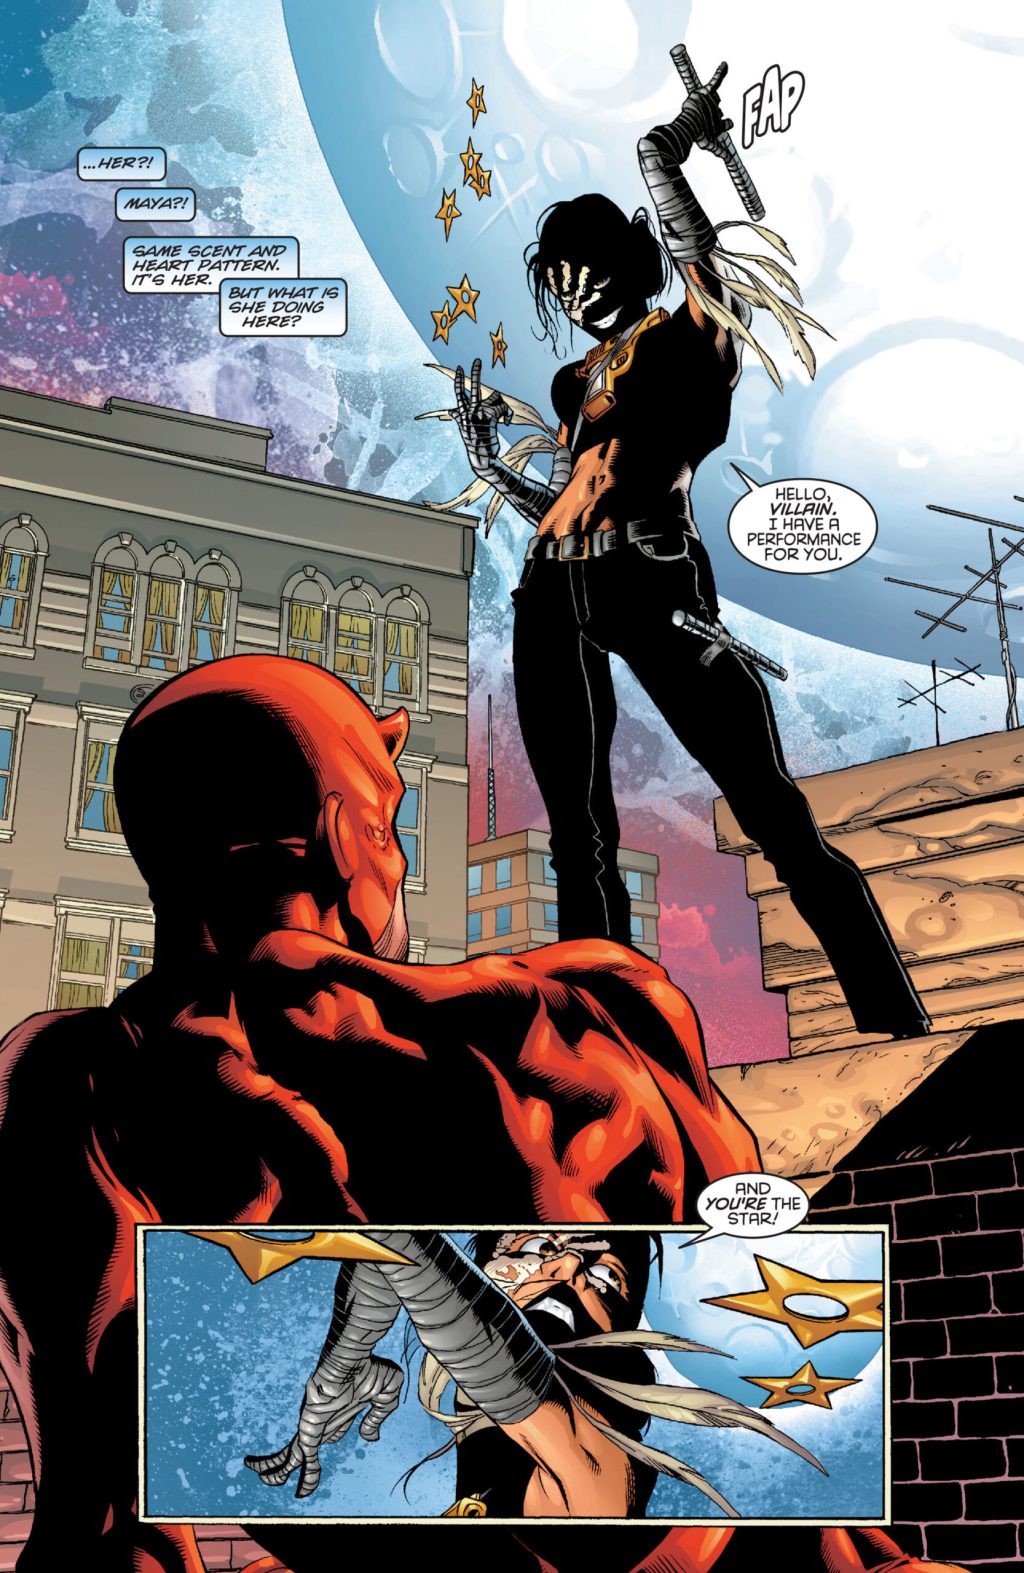 Maya Lopez, under the mistaken belief that Daredevil killed her father, makes her costumed debut as Echo in Daredevil Vol. 2 #11 "Dinner and a Movie" (2000), Marvel Comics. Words by David Mack, art by Joe Quesada, Jimmy Palmiotti, Richard Isanove, and Richard Starkings.